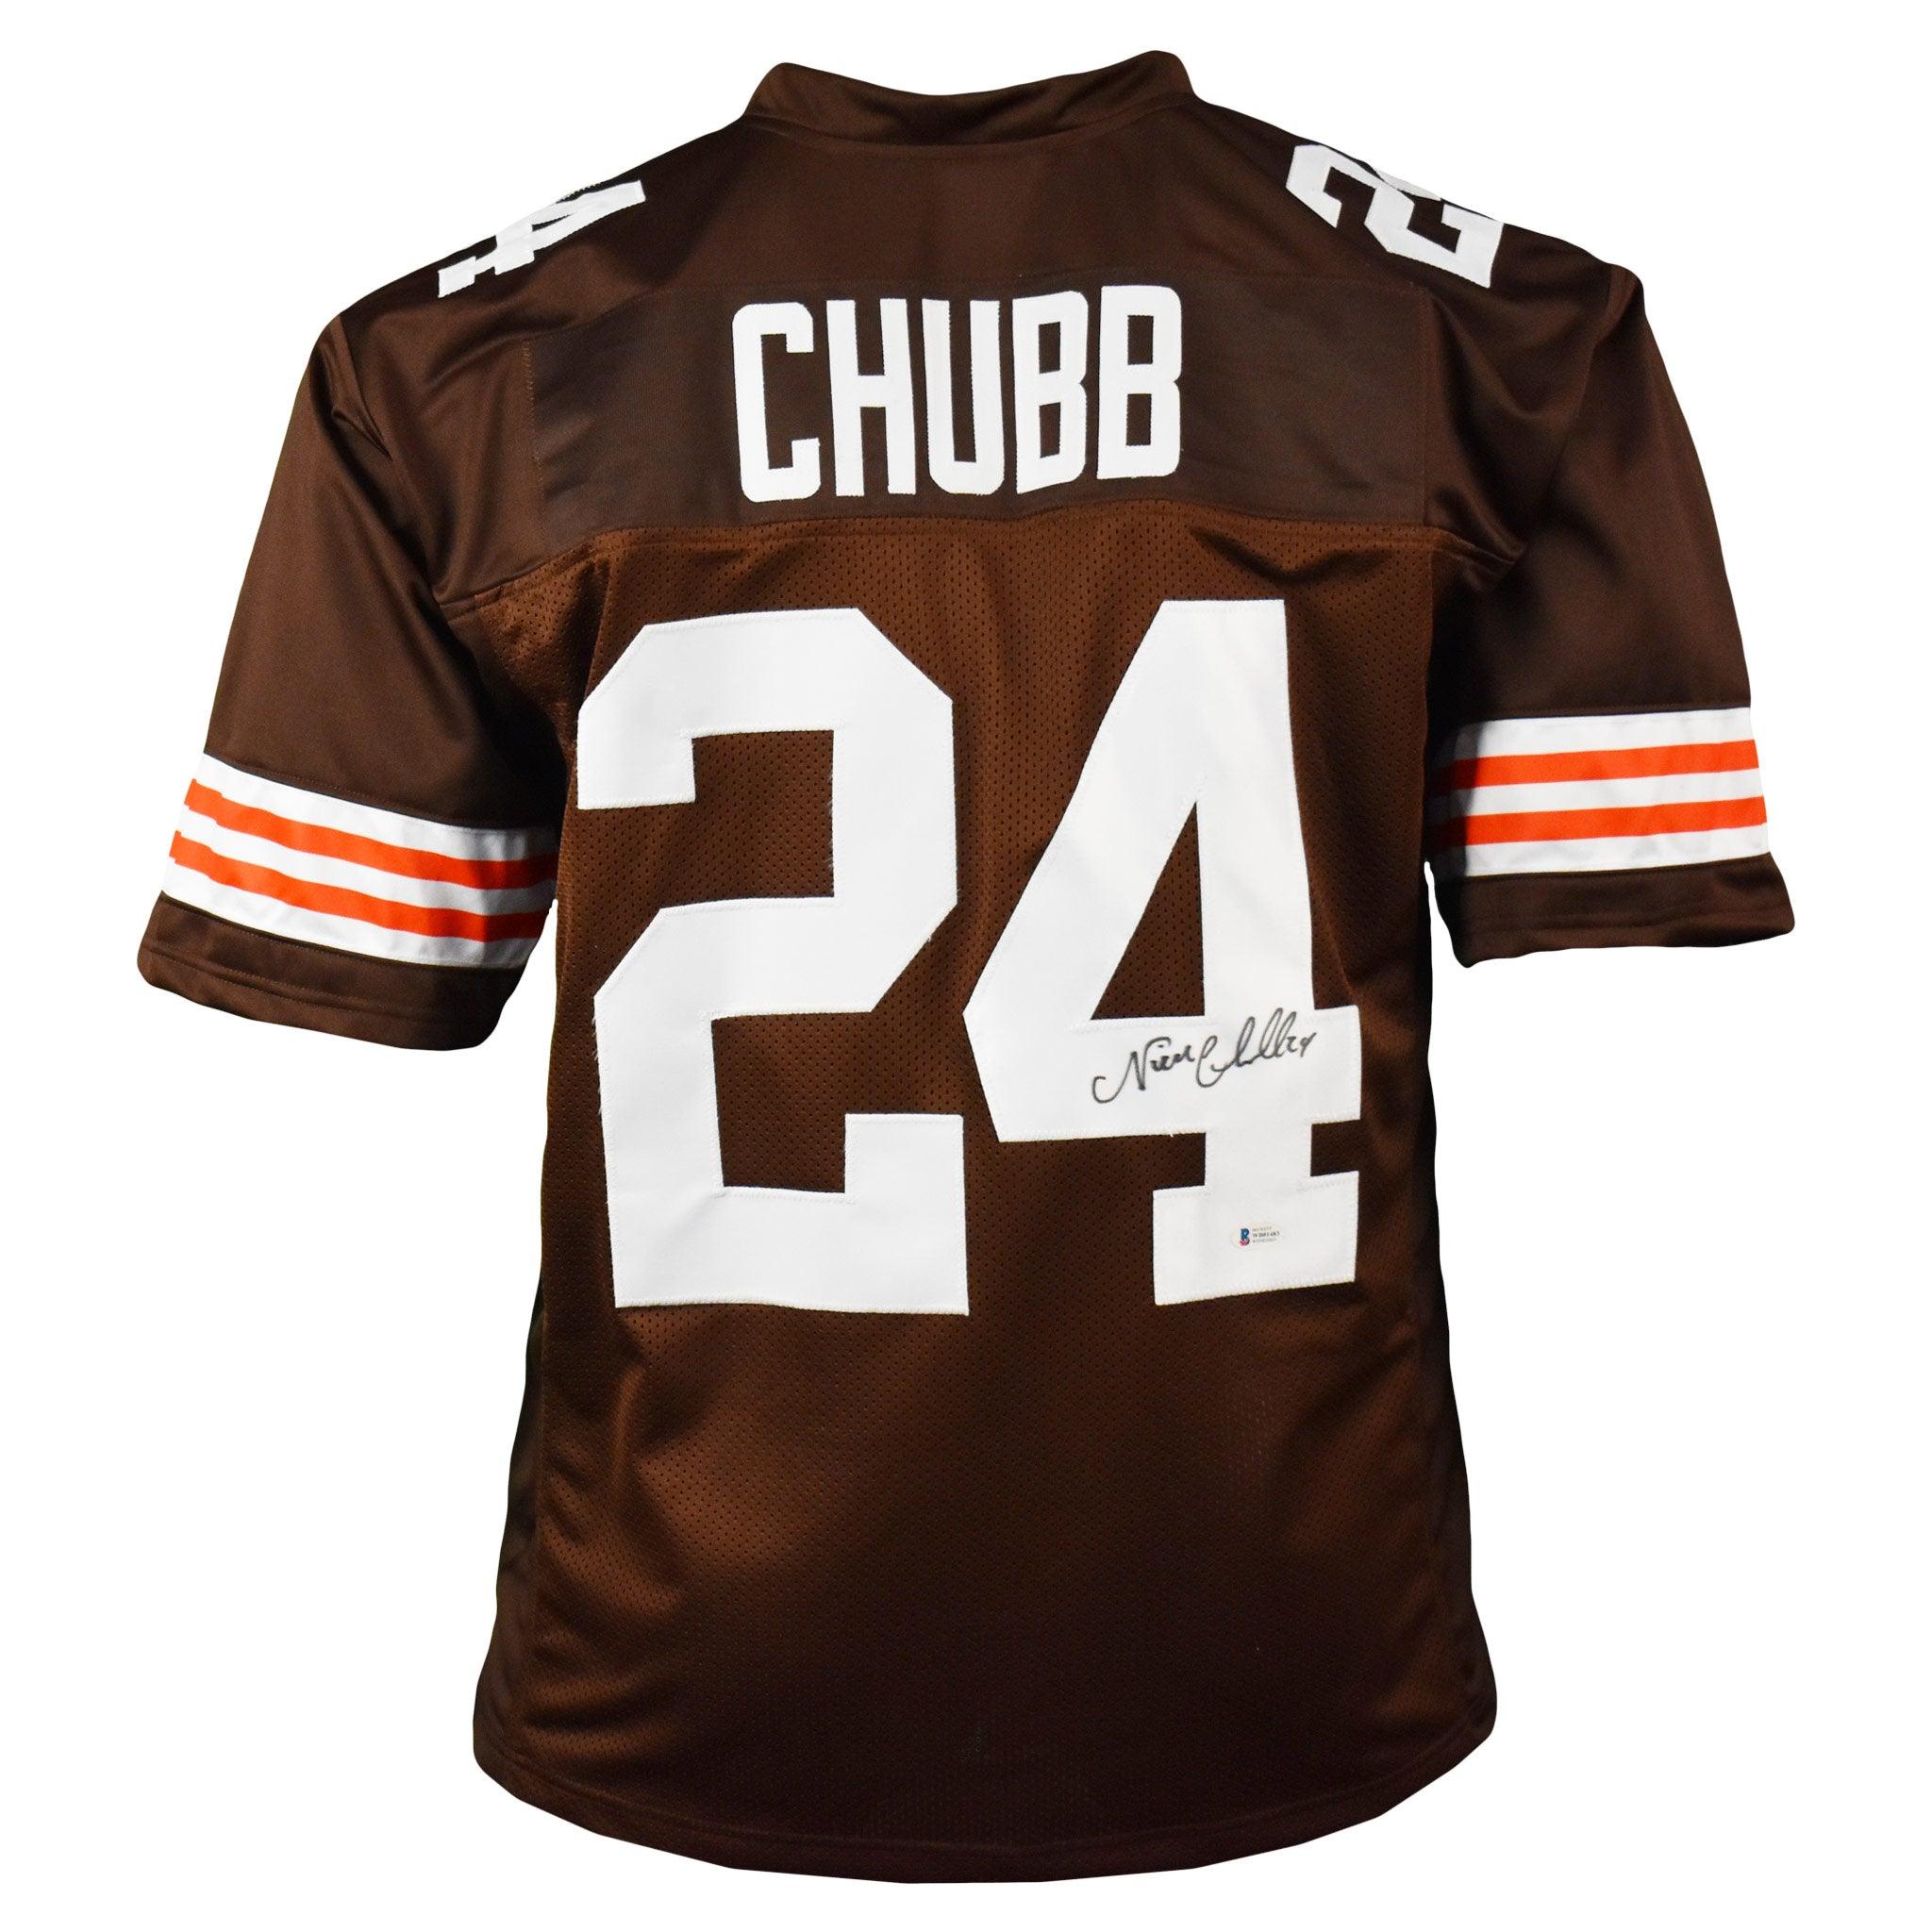 Nike Toddler Cleveland Browns Nick Chubb #24 Brown Game Jersey